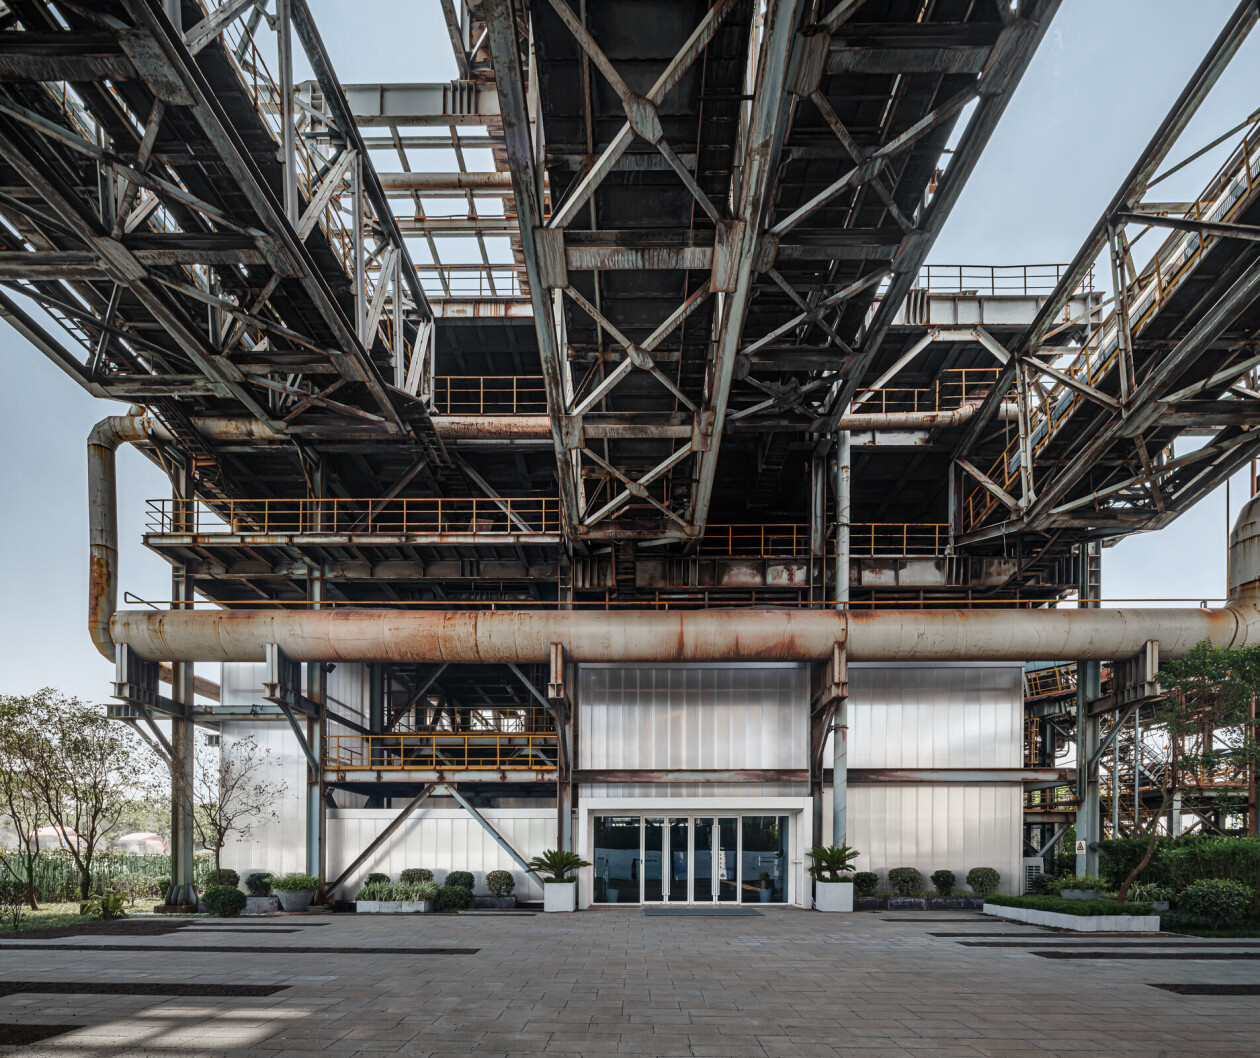 Kokaistudios transform a disused steel production site into a mixed-use eco-industrial park